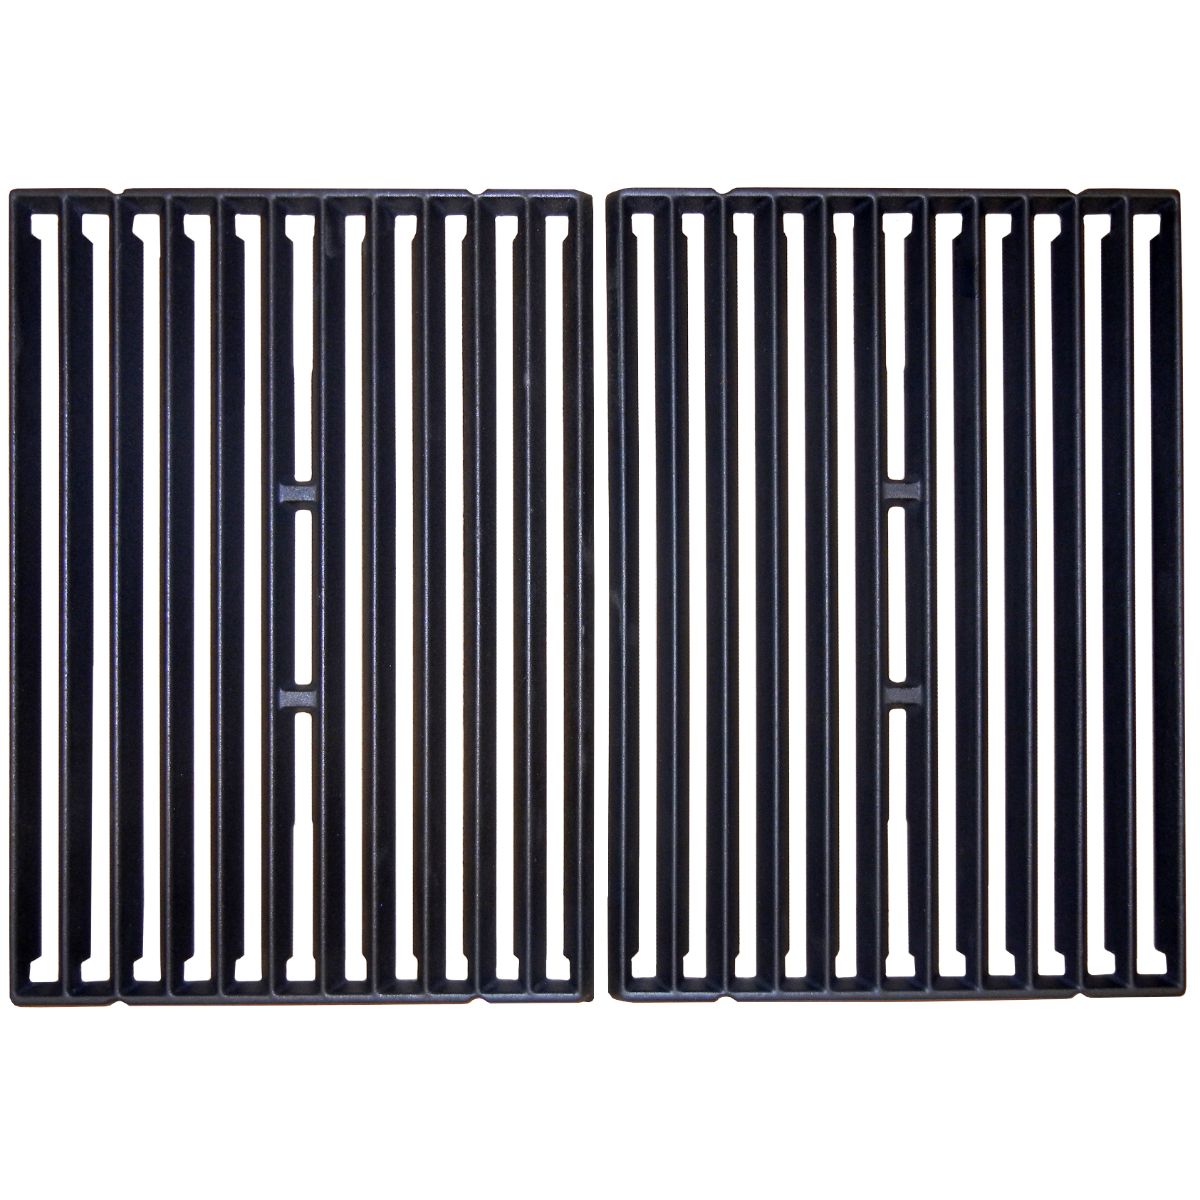 Matte cast iron cooking grid for Broil King, Broil-Mate, Sterling brand gas grills